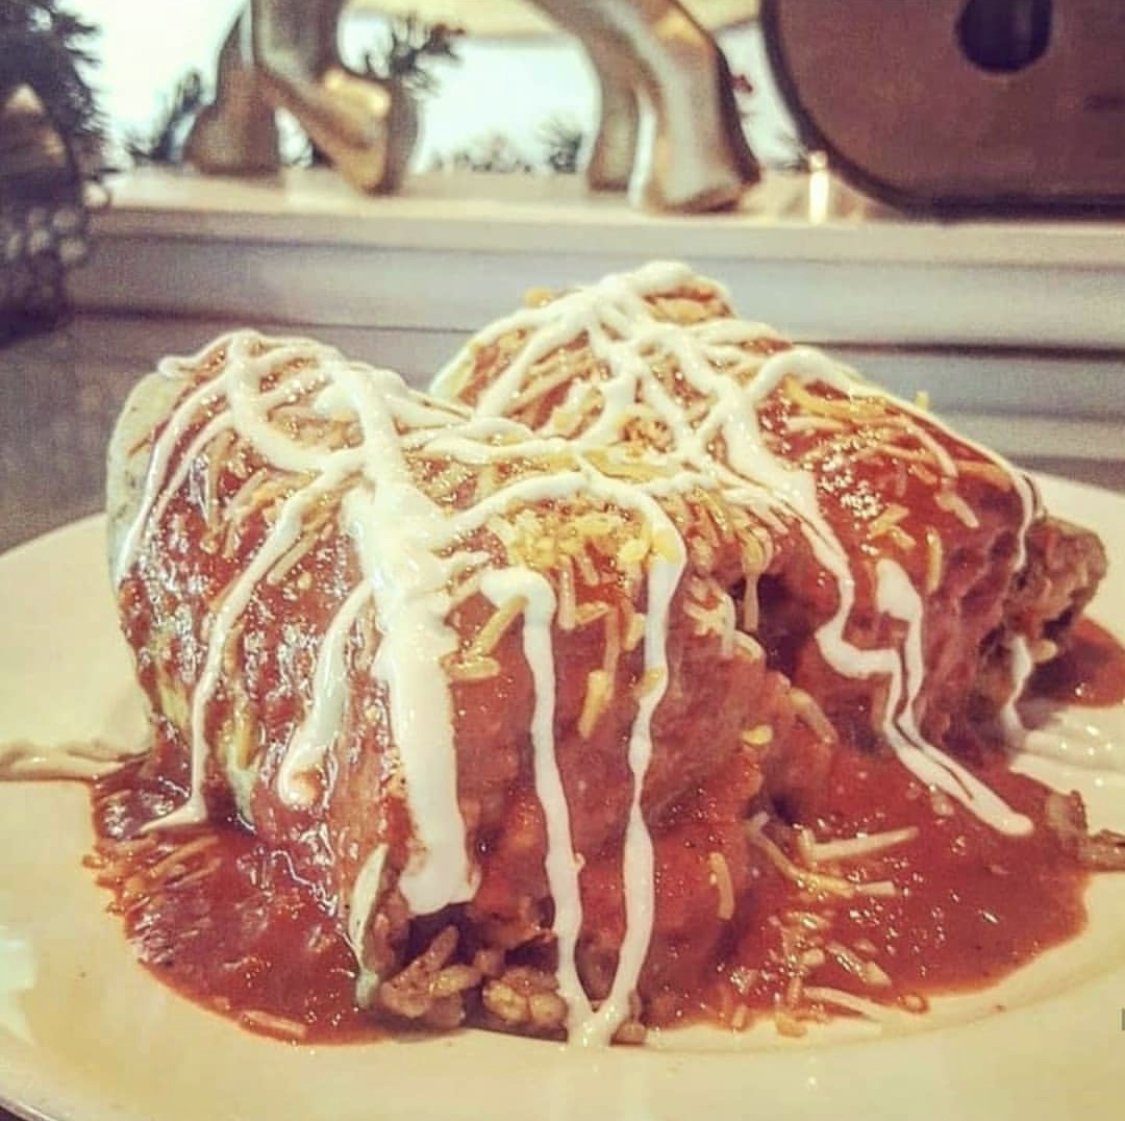 Try The Carvery Sandwich Shop Today!! Look at these: Faith’s Favorite Enchiladas, head their for lunch :)
@thecarveryss 

#thecarverysandwichshop #ibdmedia #surreyeats #whiterockeats #surrey604 #southsurreyeats #langleyeats #surrey #southsurreybc #southsurrey #surreybc